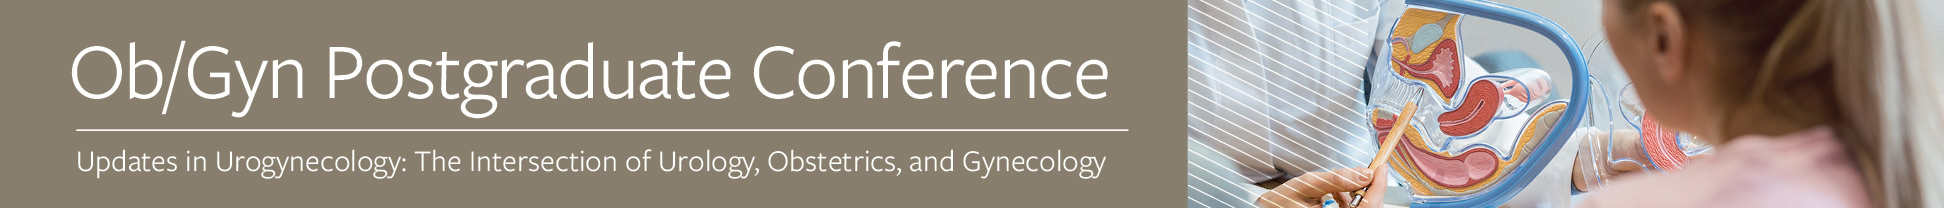 OB/Gyn Postgraduate Conference 2019:  Updates in Urogynecology: The Intersection of Urology, Obstetrics, and Gynecology Banner